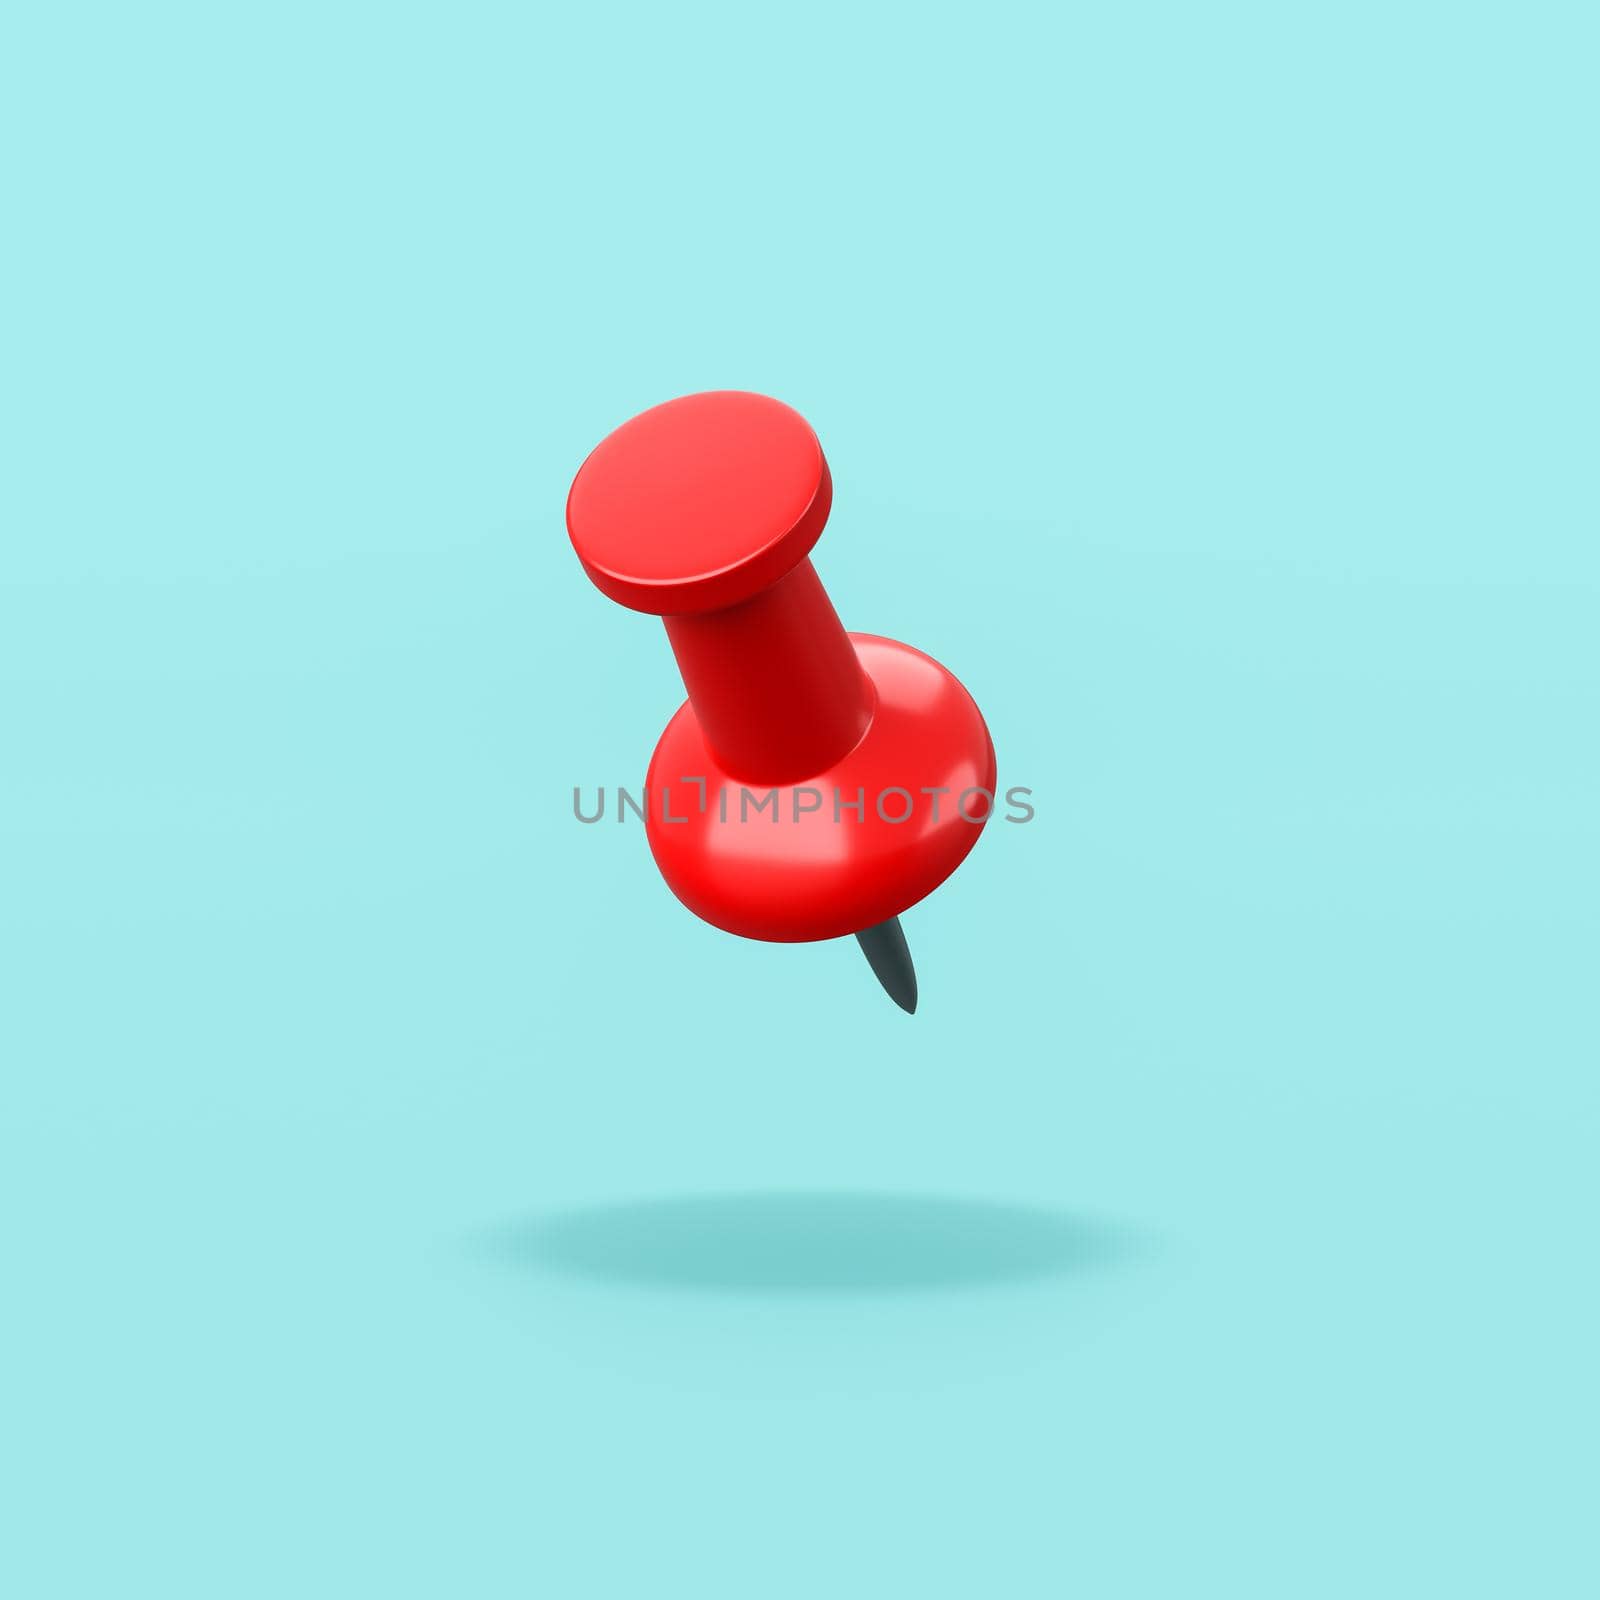 Red Pushpin on Blue Background by make